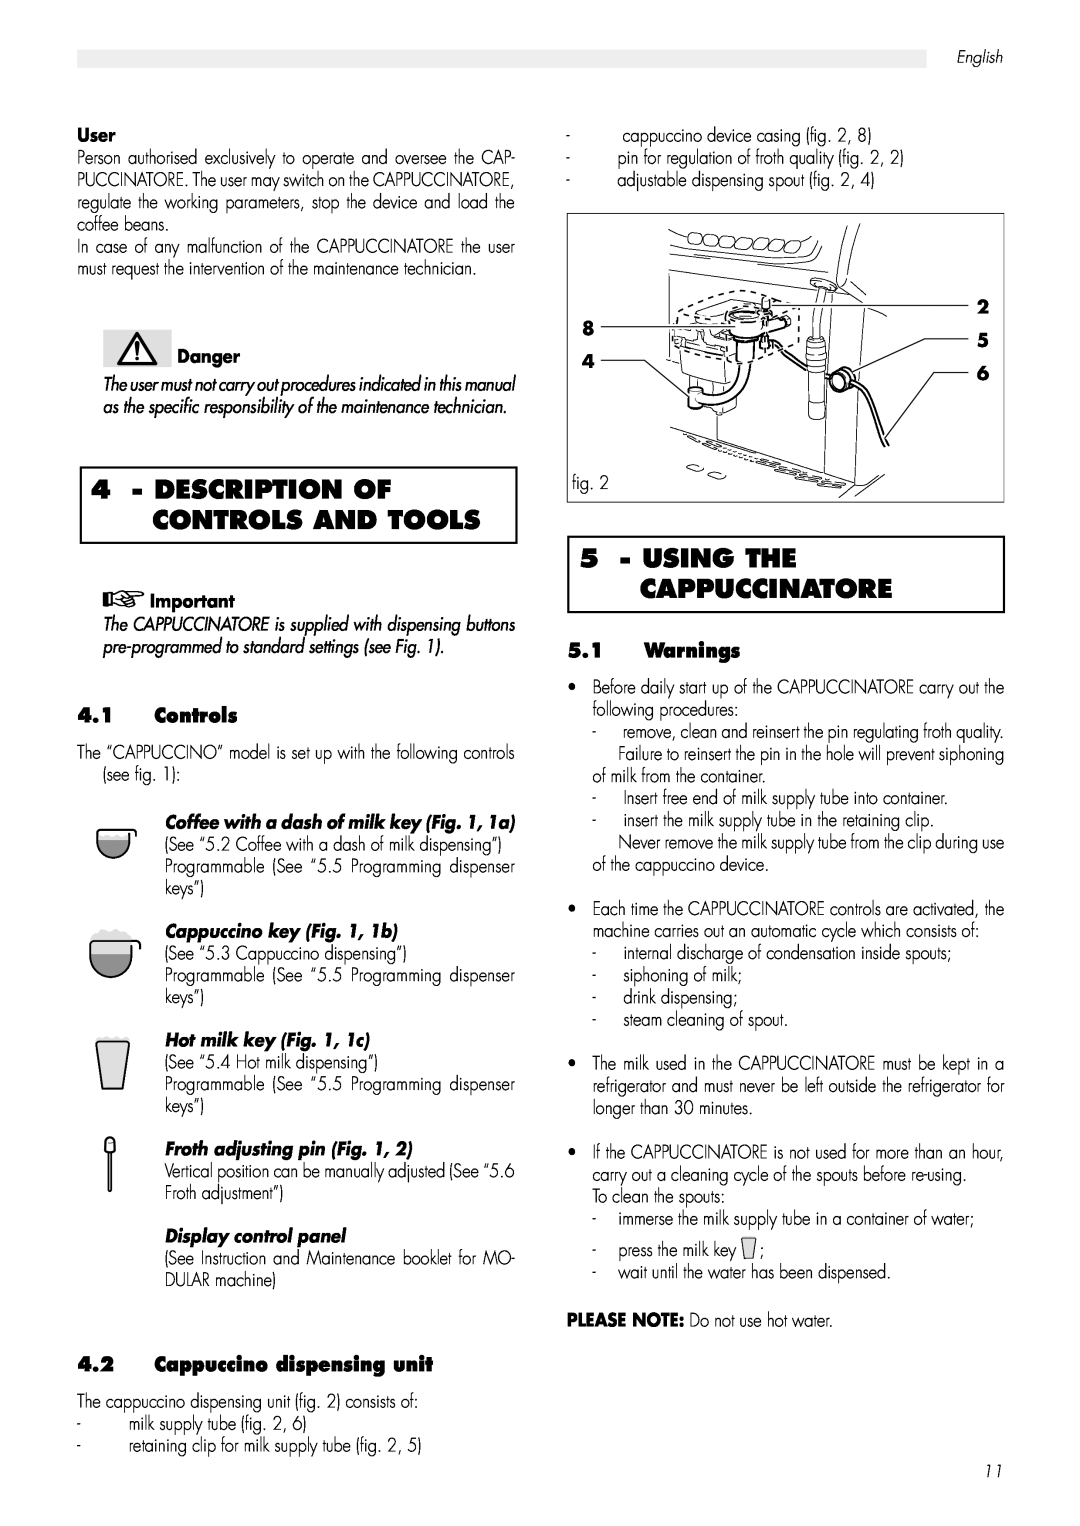 Saeco Coffee Makers CAP001B Description Of Controls And Tools, Using The Cappuccinatore, 4.1Controls, 5.1Warnings, User 